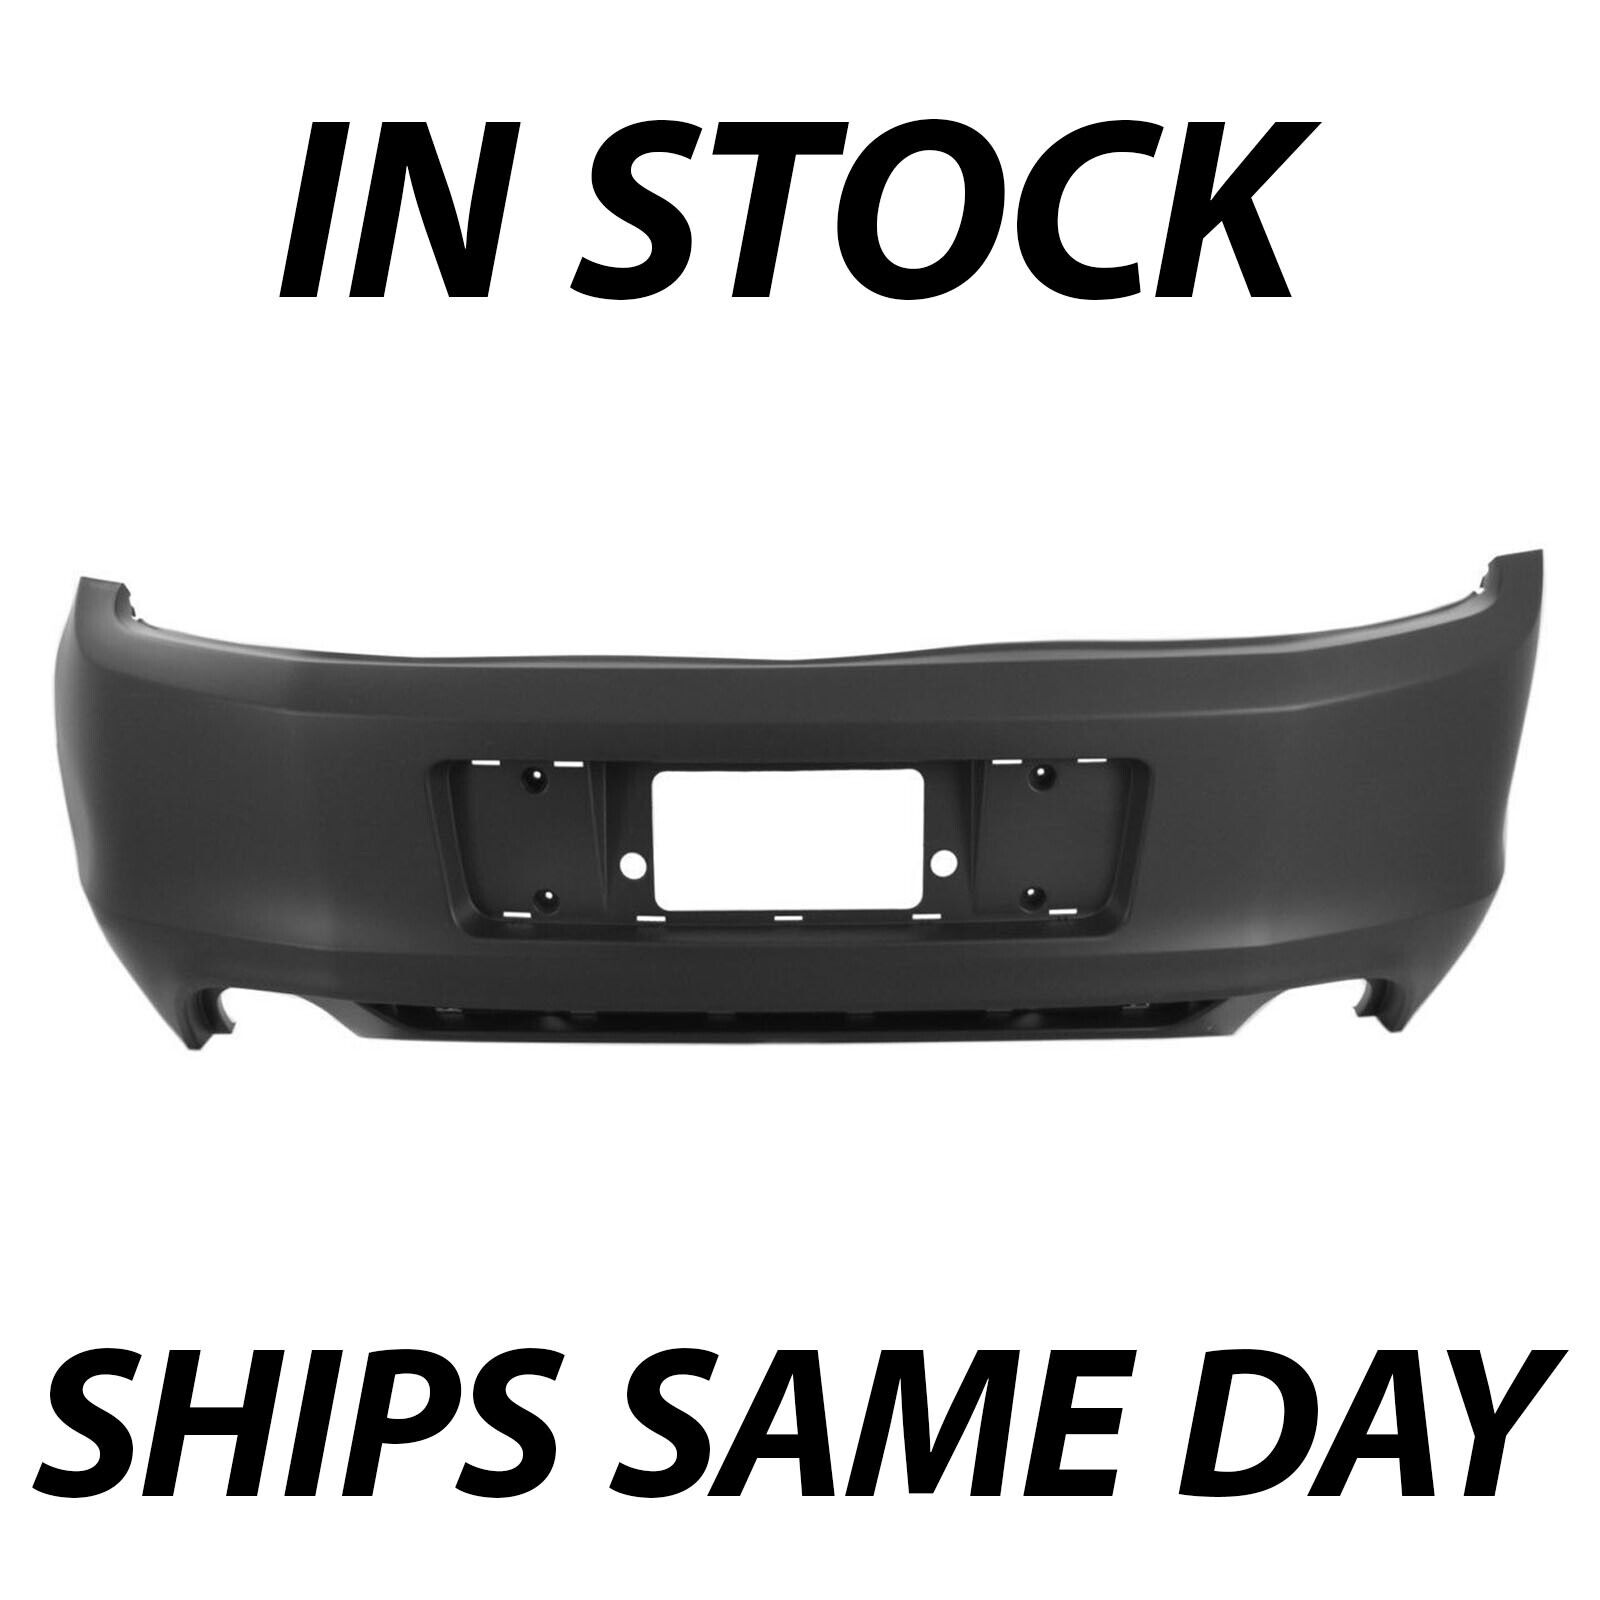 NEW Primered -- Rear Bumper Cover for 2013 2014 Ford Mustang Without Park Assist